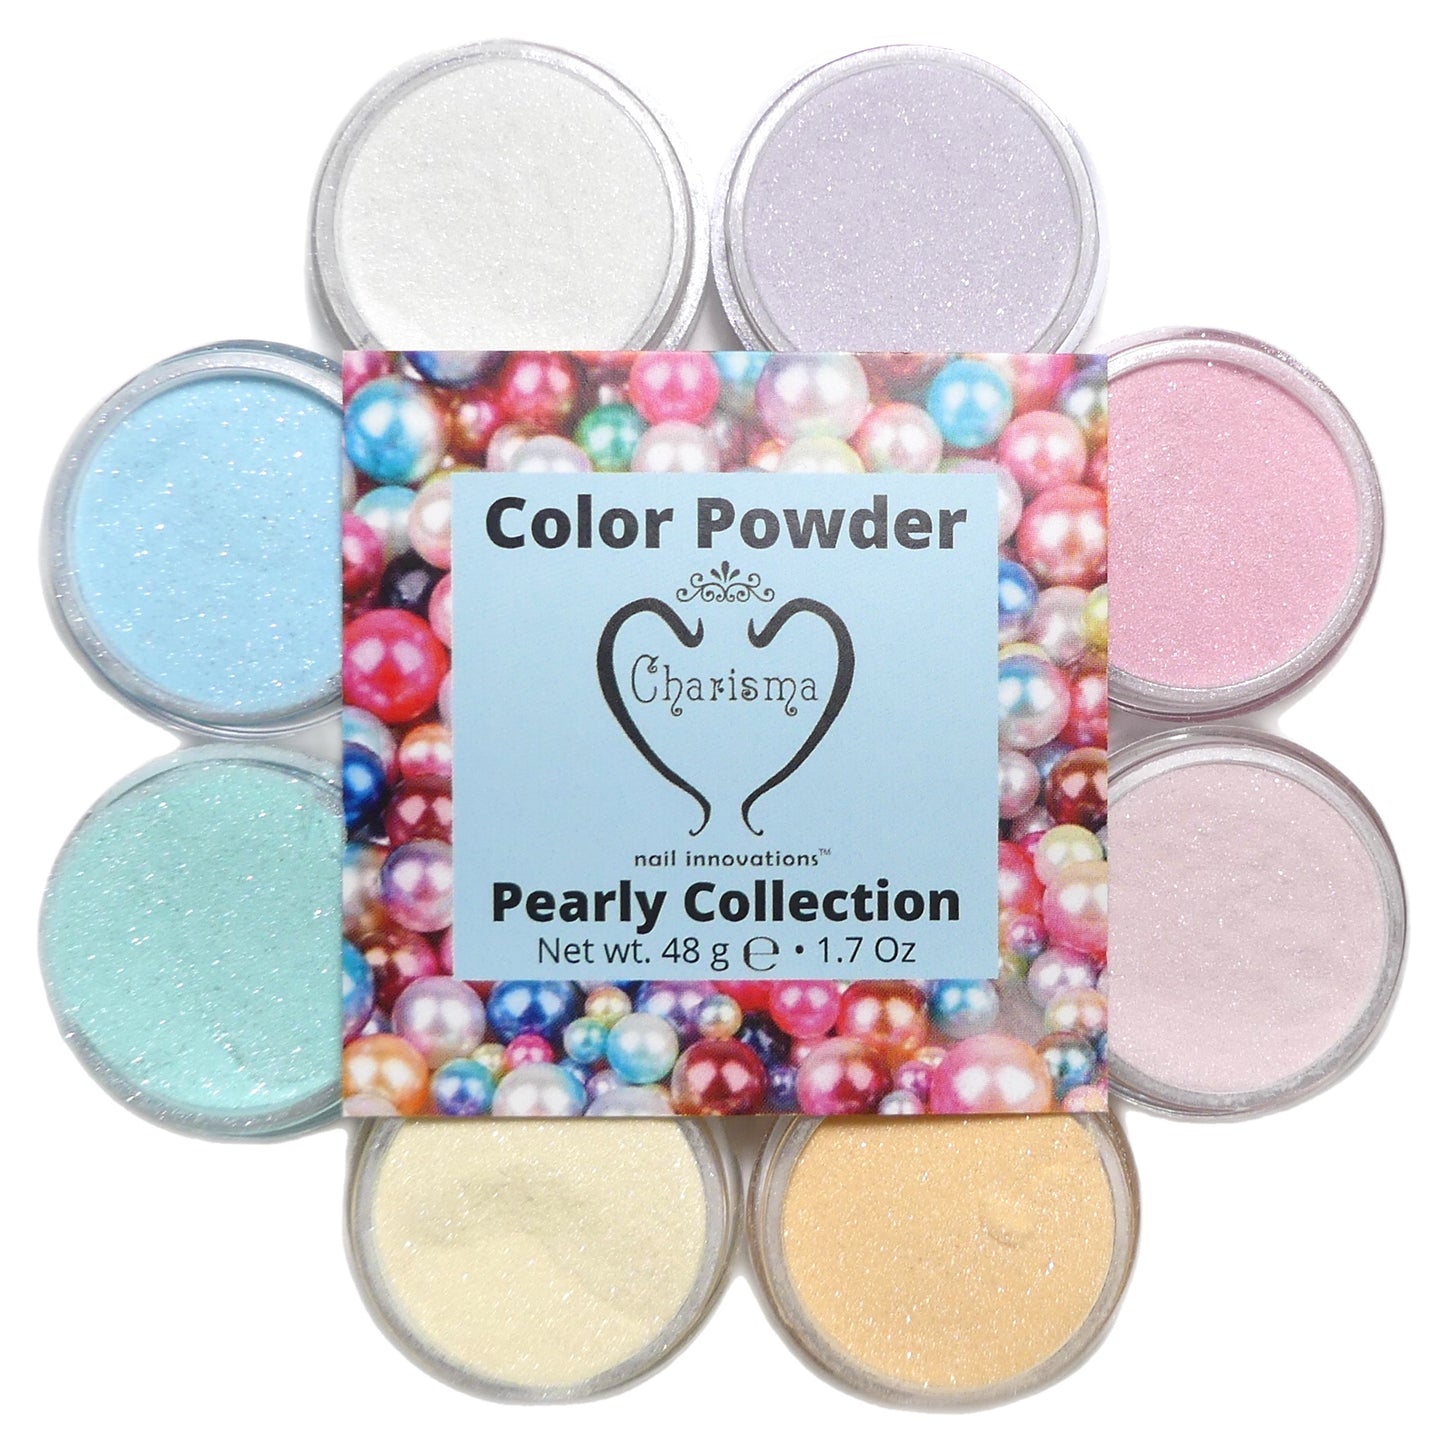 Charisma Nail Acrylic 3D Powder - Pearly Collection (8 x 6g)